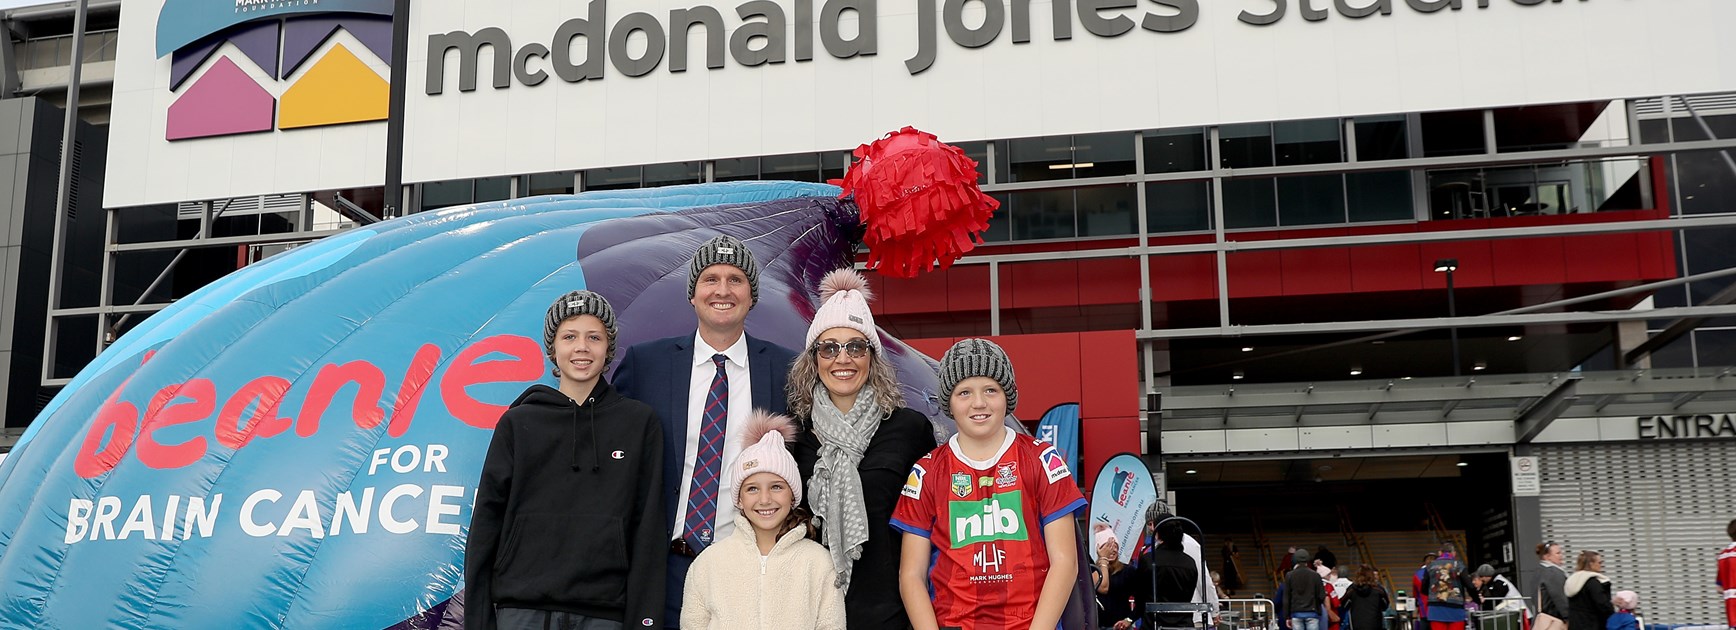 Hughes amazed by $3.1m Beanie For Brain Cancer Round windfall